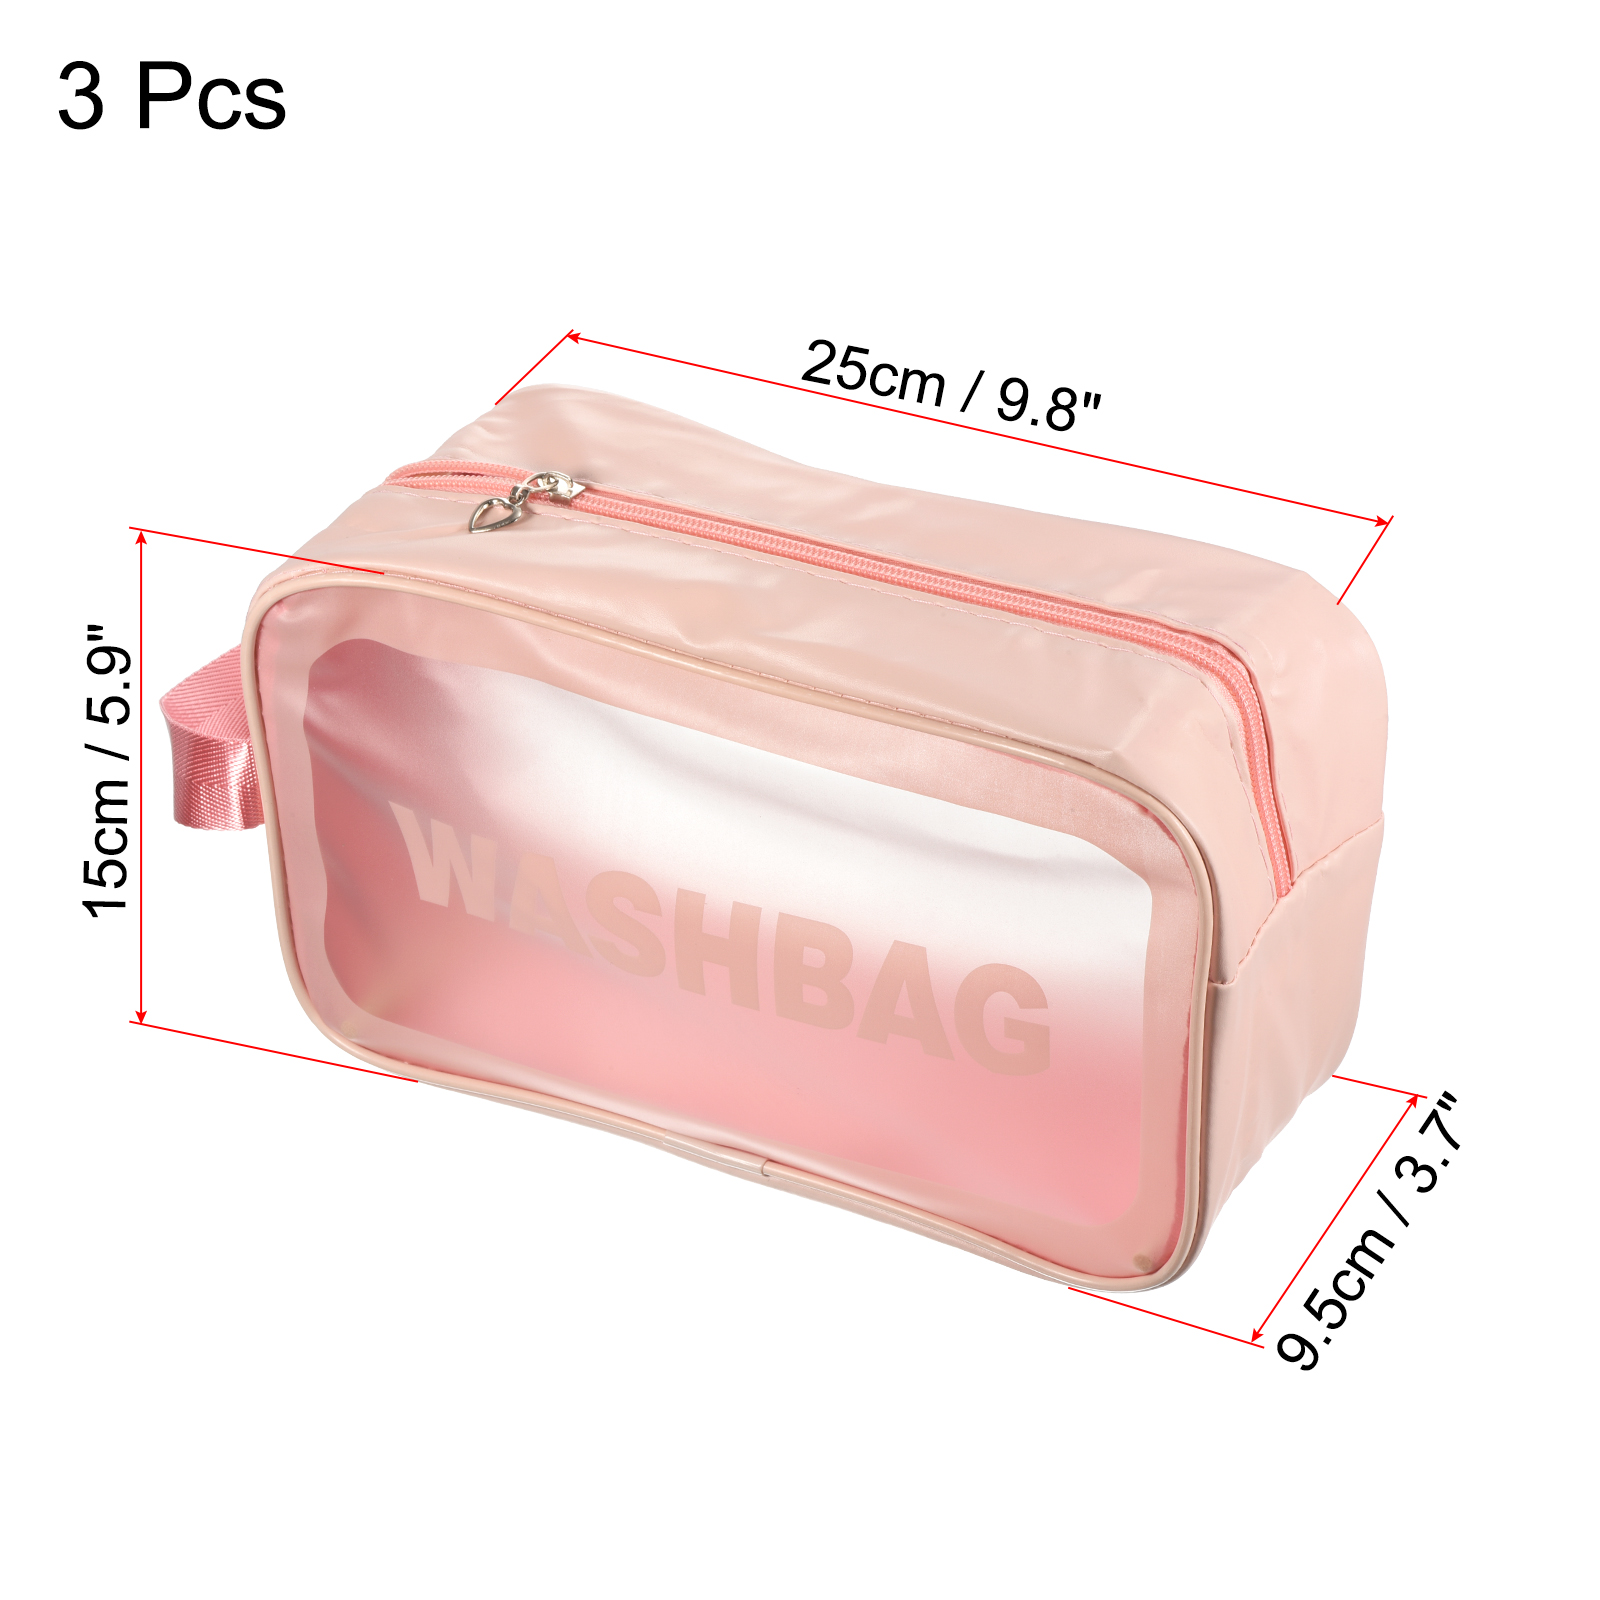 Uxcell 5.9"x9.8"x3.7" PVC Clear Toiletry Bag Makeup Bags with Zipper Handle Pink 3 Pack - image 2 of 5